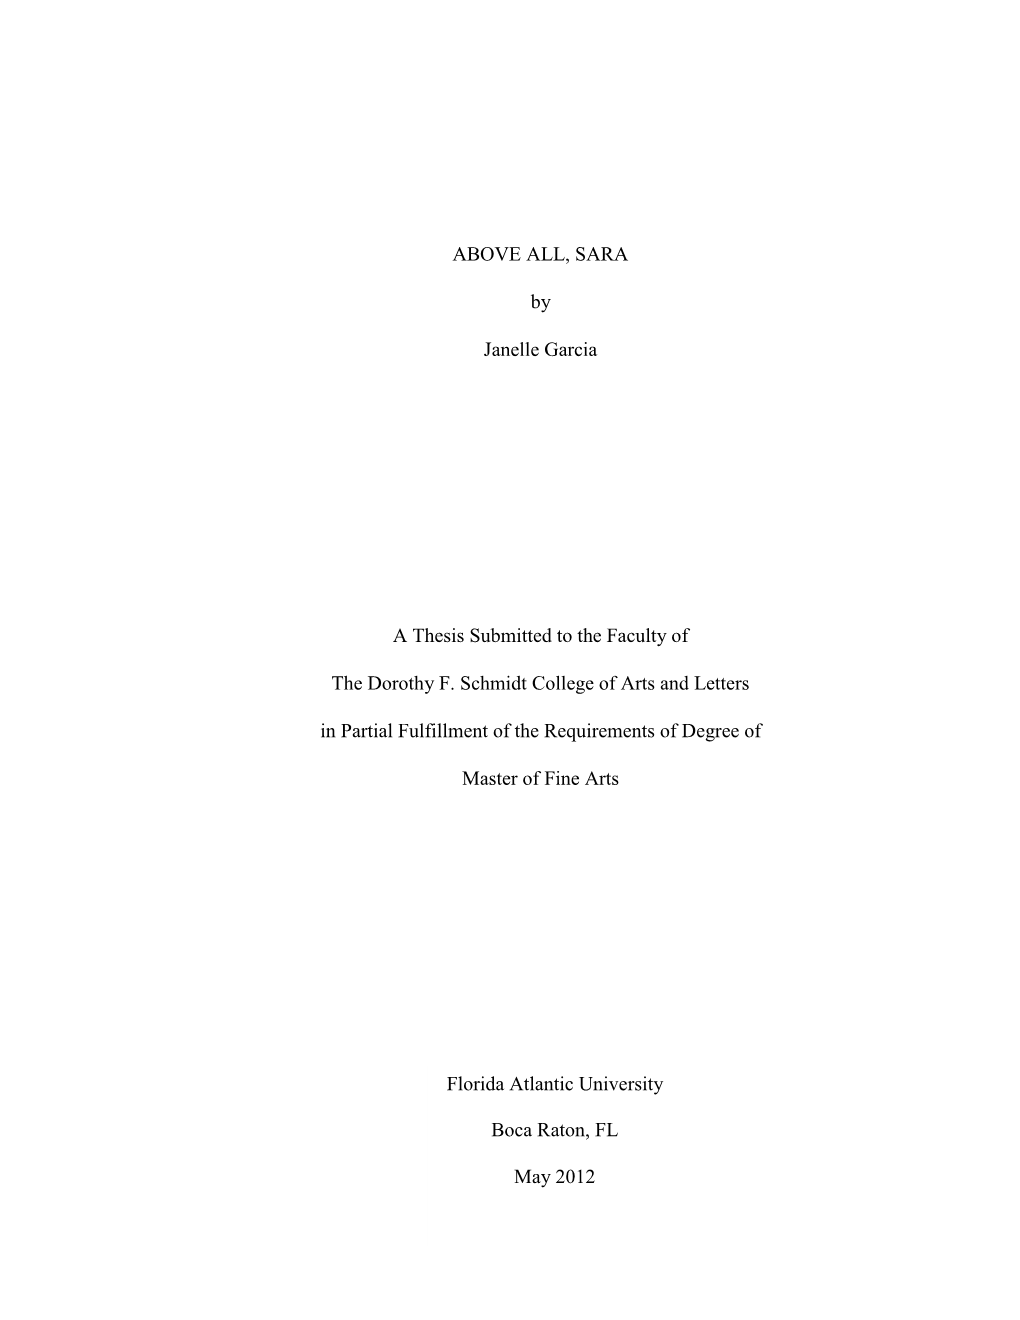 I ABOVE ALL, SARA by Janelle Garcia a Thesis Submitted to the Faculty of the Dorothy F. Schmidt College of Arts and Letters in P